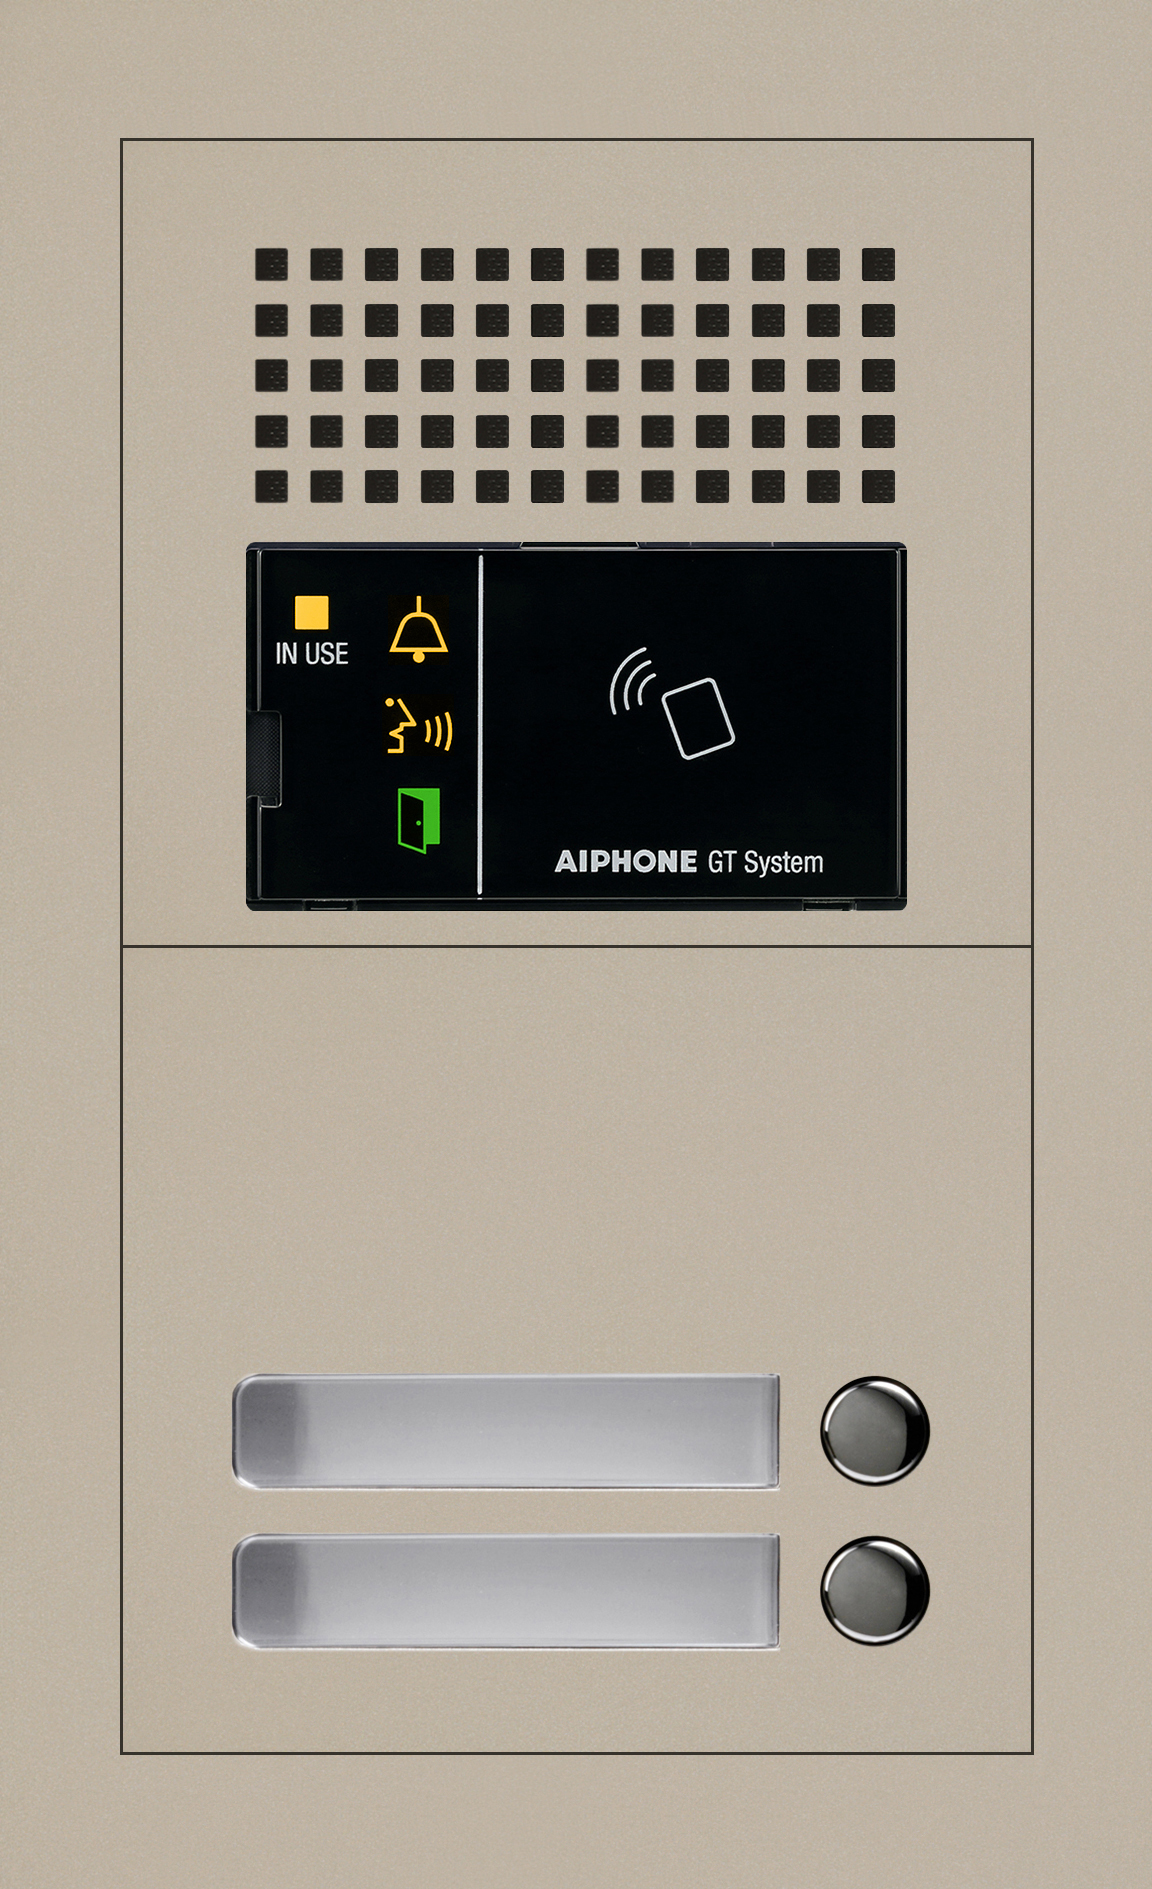 NYC intercom & security is a complete  security solution centre